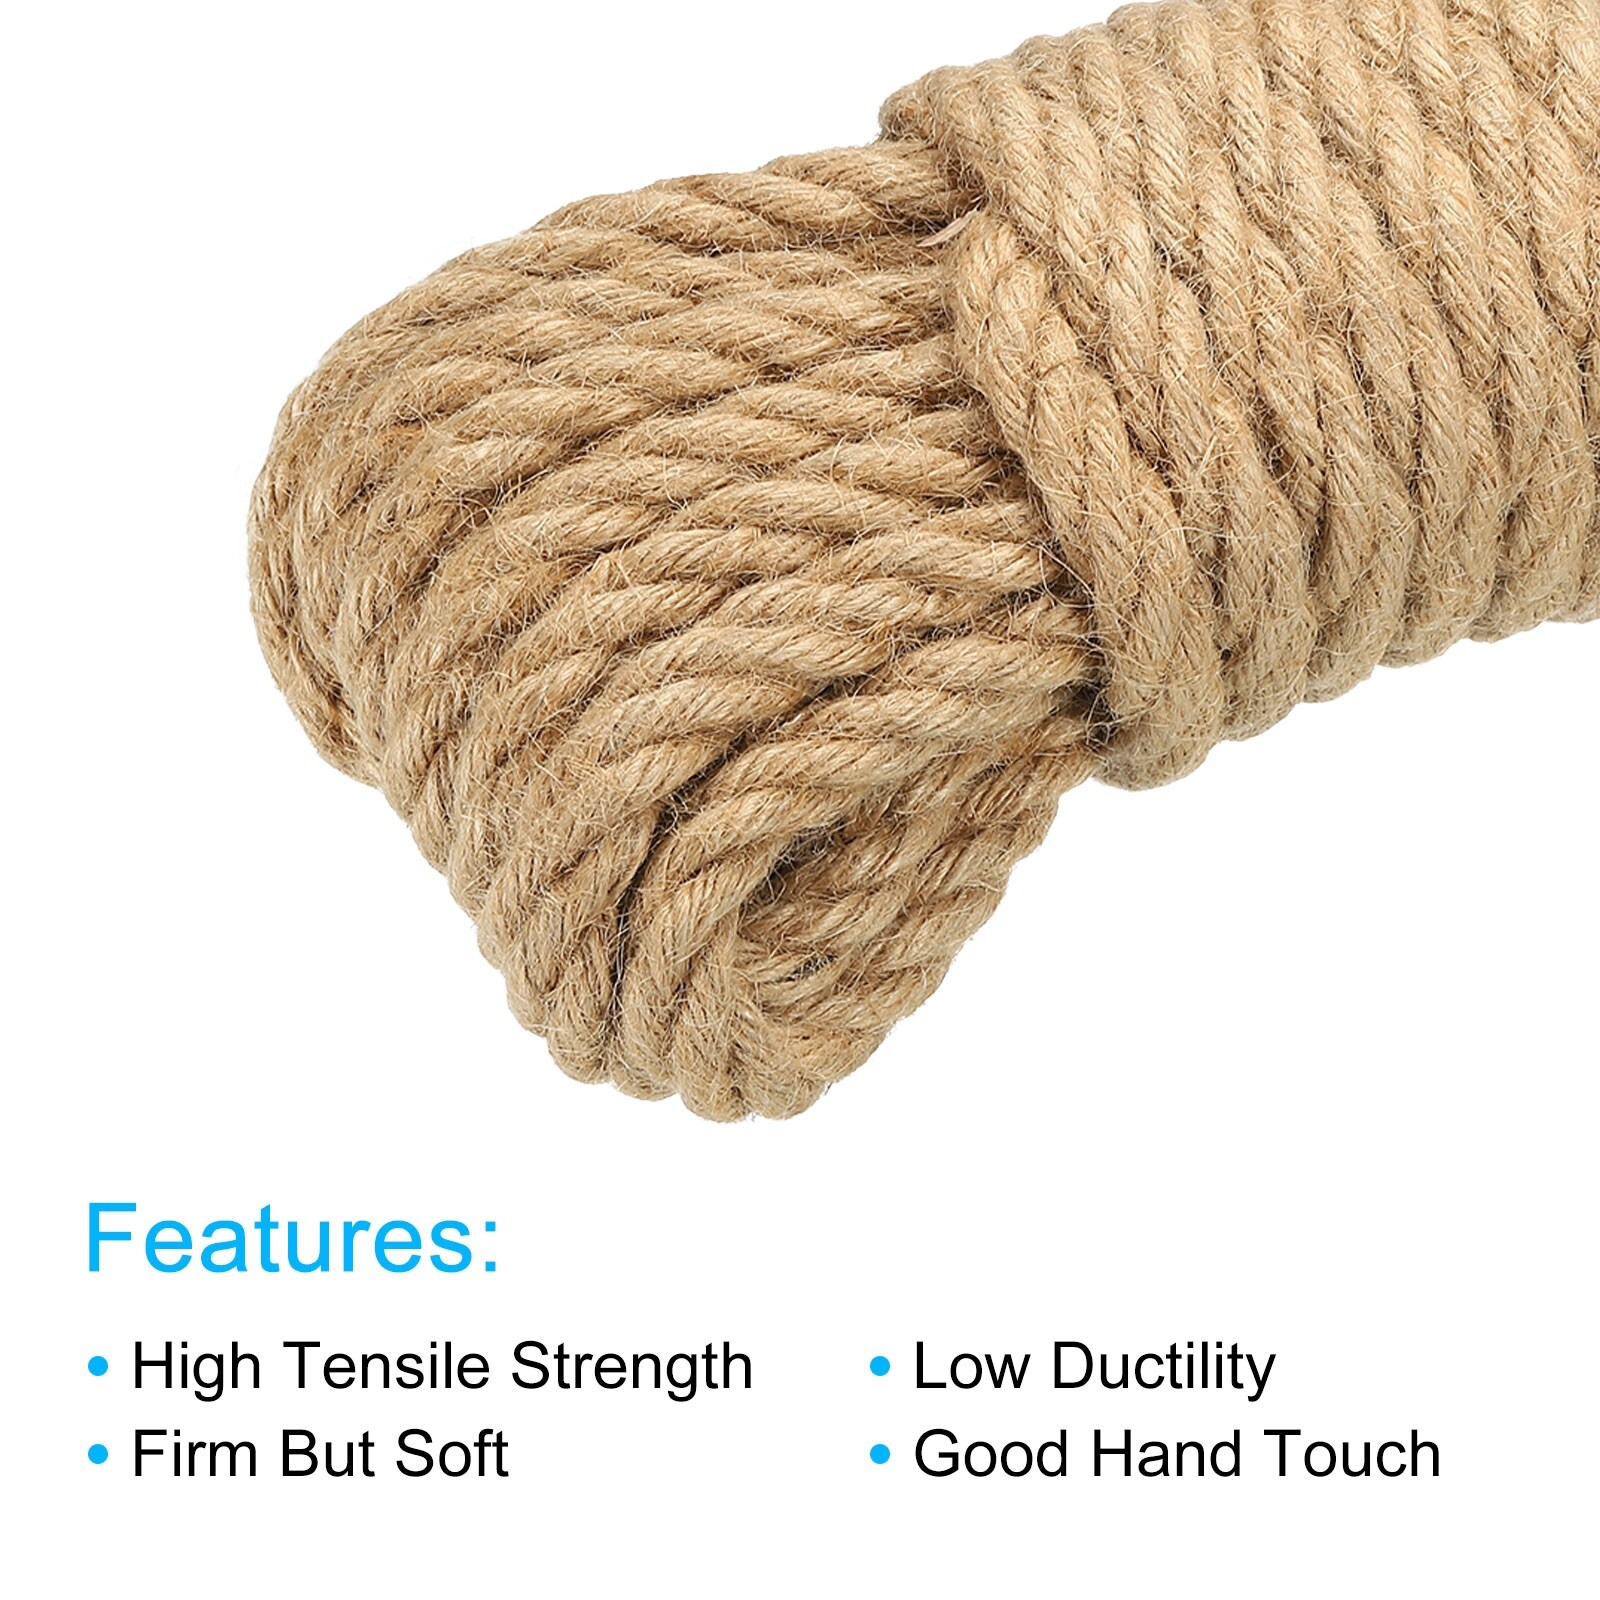 Jute Twine 12mm, 33 Feet Long Brown Twine Rope for DIY Subjects - Bed Bath  & Beyond - 36550033